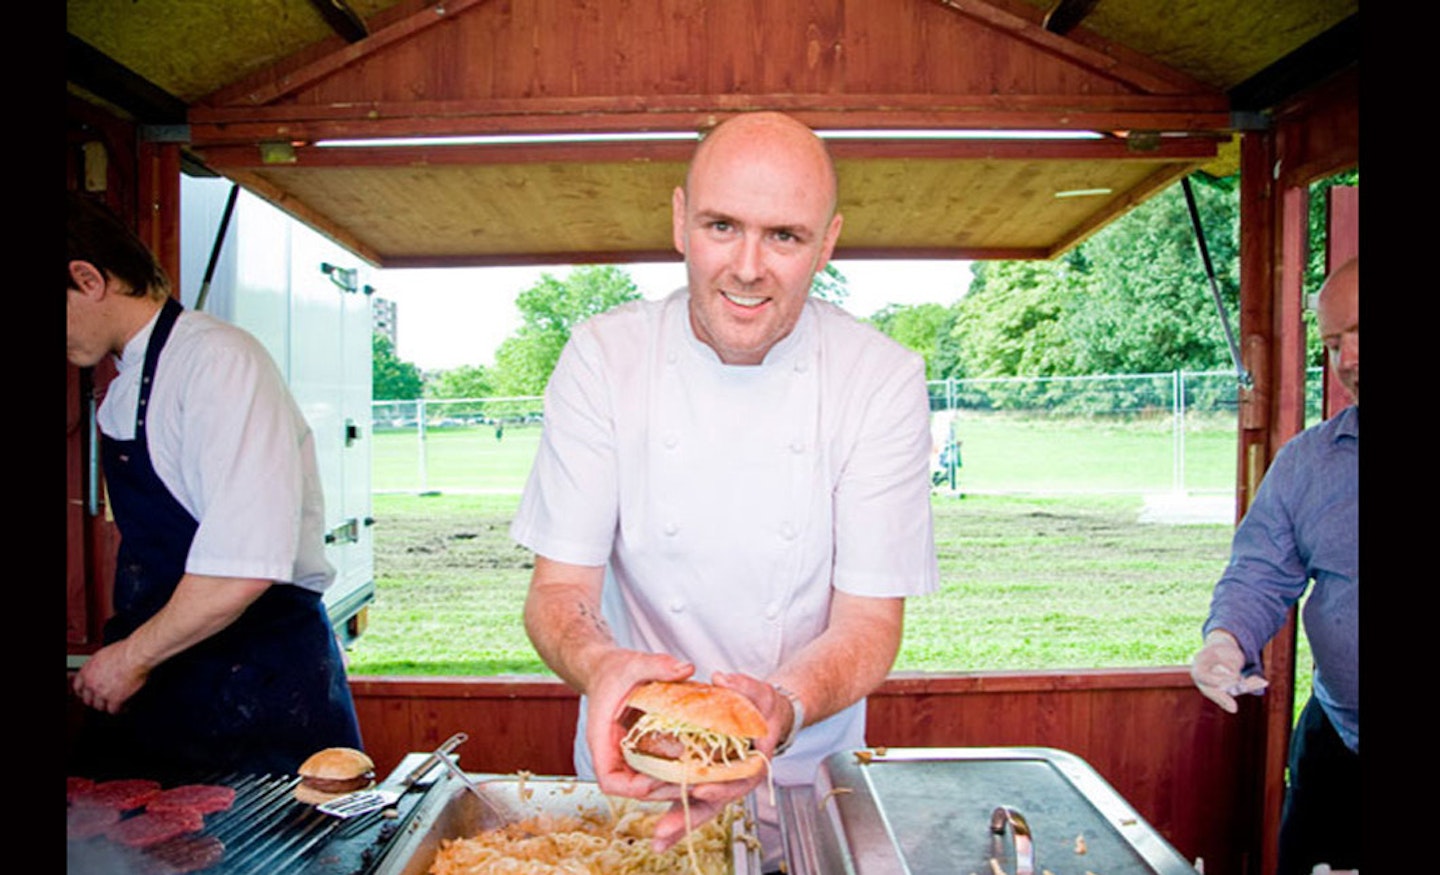 7. Liverpool Food and Drink Festival (7-8th September, Sefton Park, Liverpool)